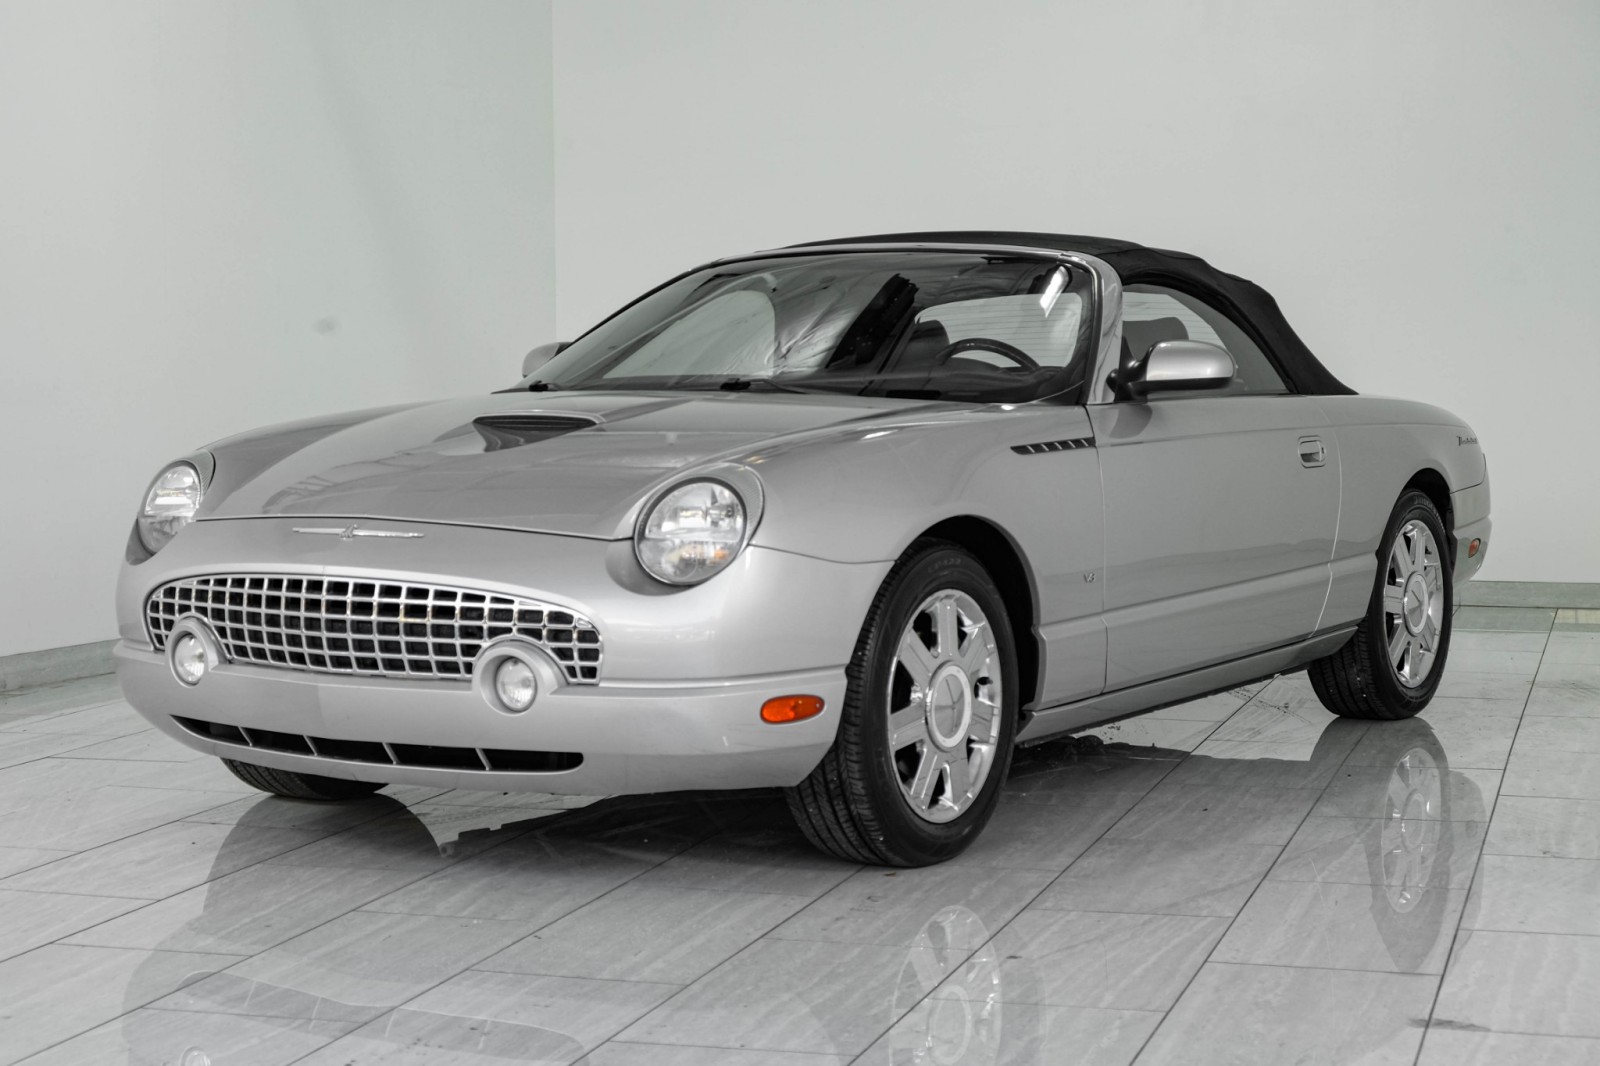 2004 Ford Thunderbird PREMIUM AUTOMATIC LEATHER HEATED SEATS LEATHER STE 4